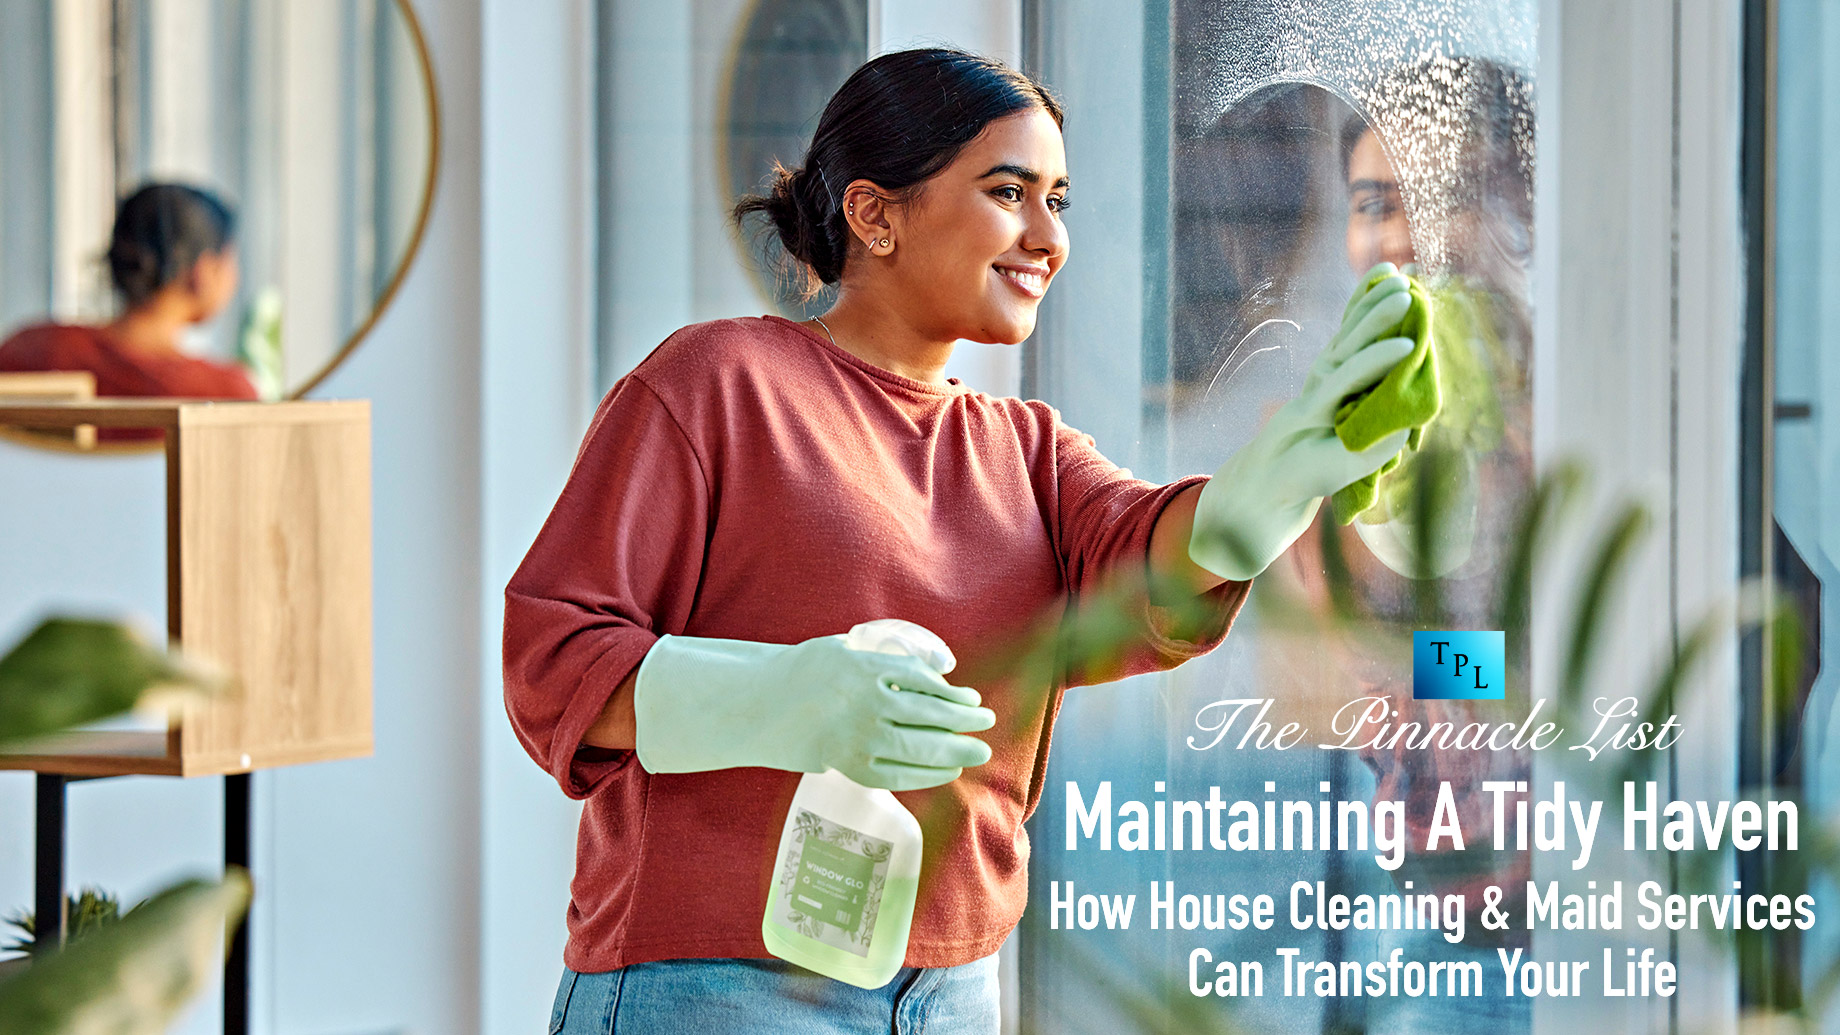 Maintaining A Tidy Haven: How House Cleaning & Maid Services Can Transform Your Life